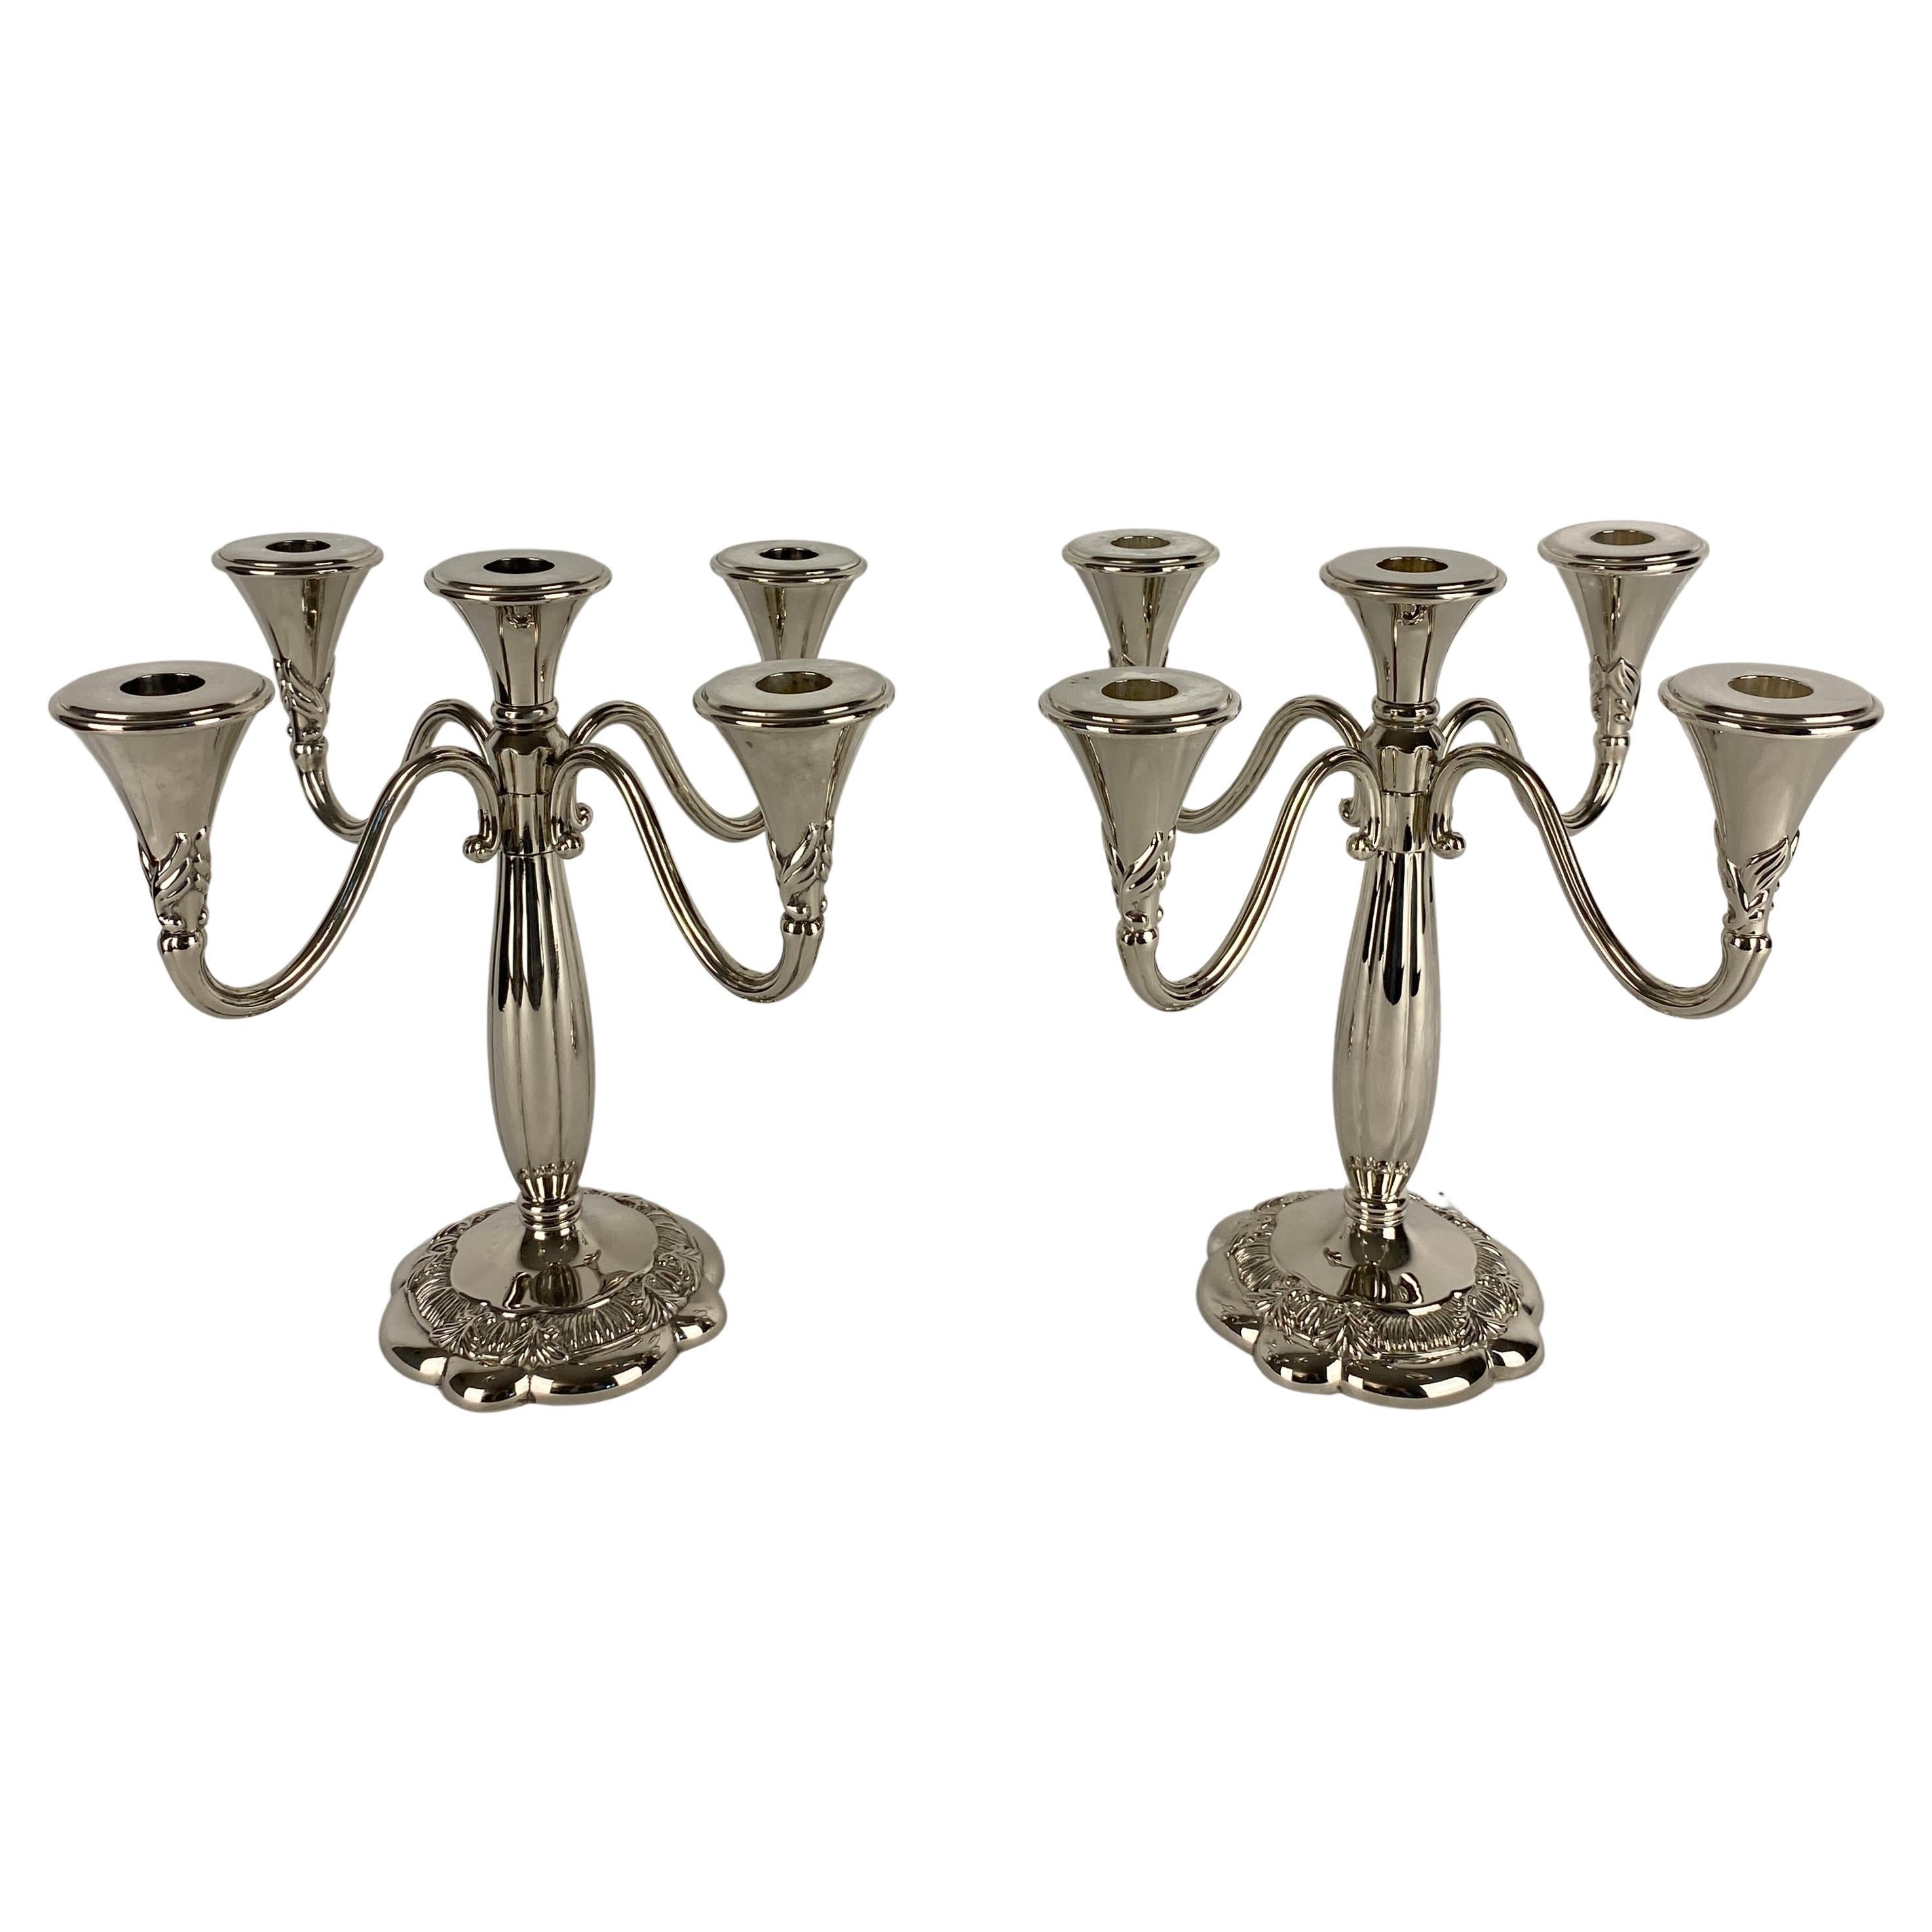 Pair of Art Deco Style Silver Plated Candelabras by Royal Gallery For Sale